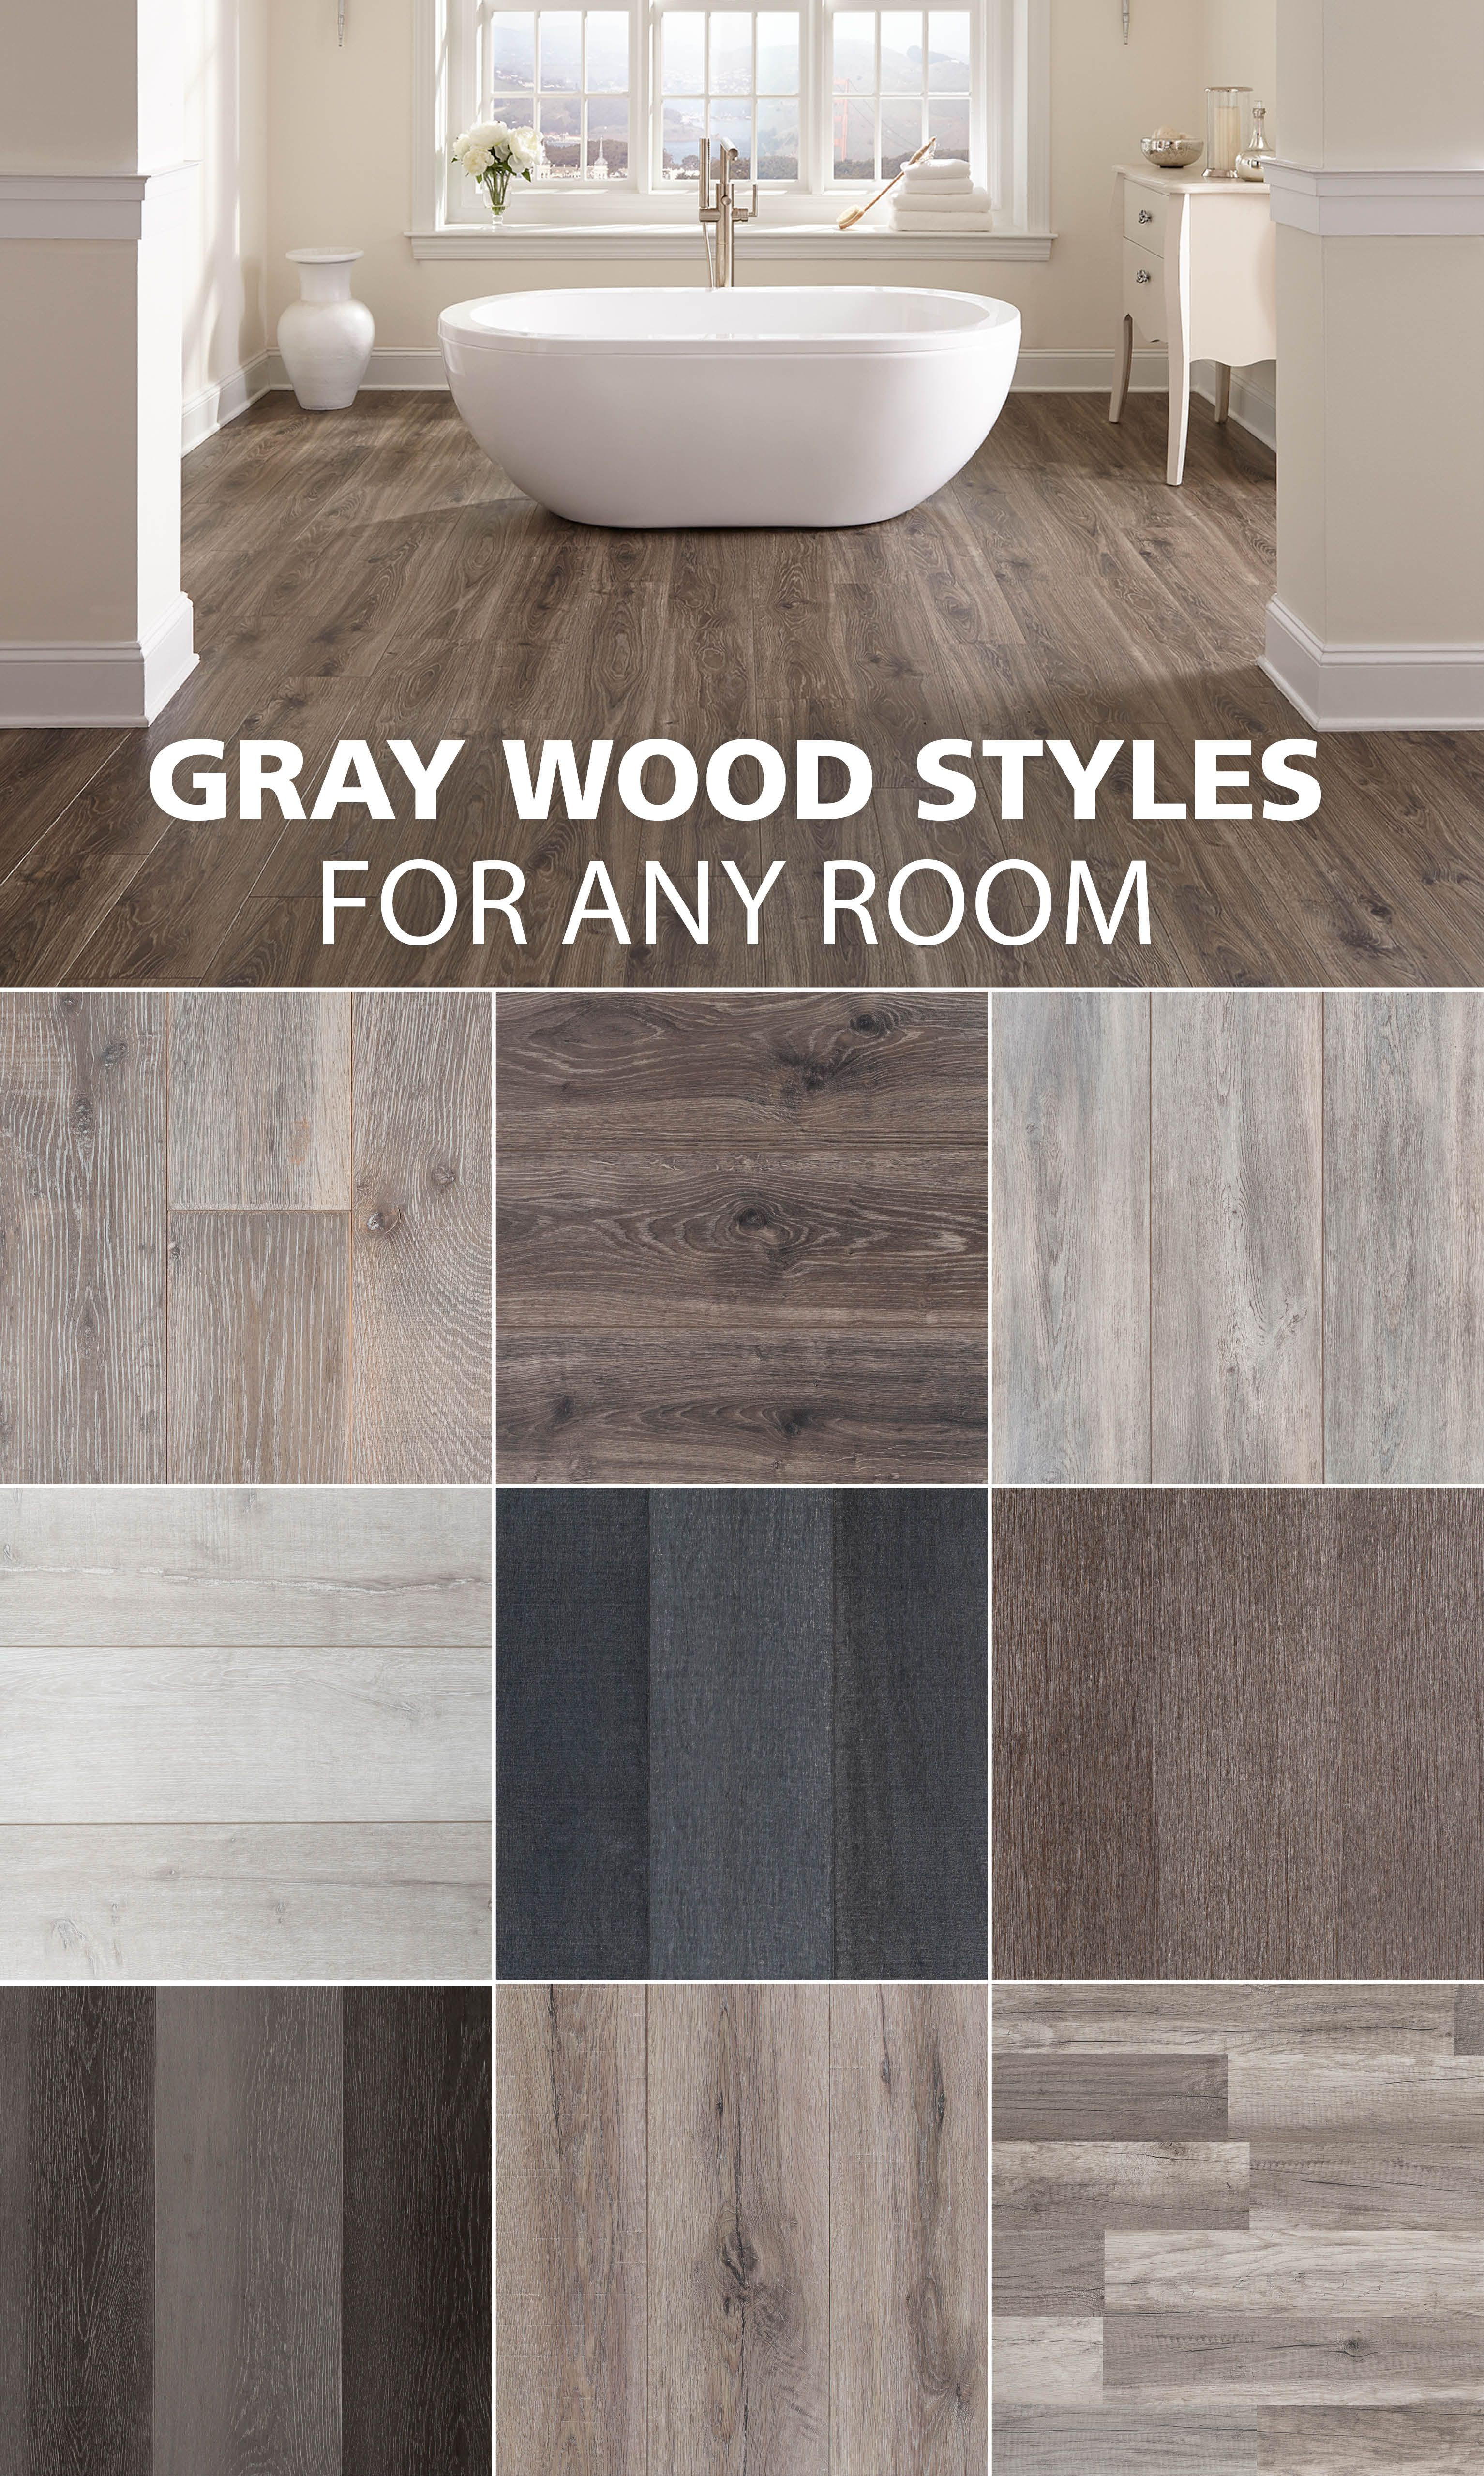 20 Stylish Hardwood Floor Price Per Square Foot 2024 free download hardwood floor price per square foot of here are some of our favorite gray wood look styles home decor intended for here are some of our favorite gray wood look styles